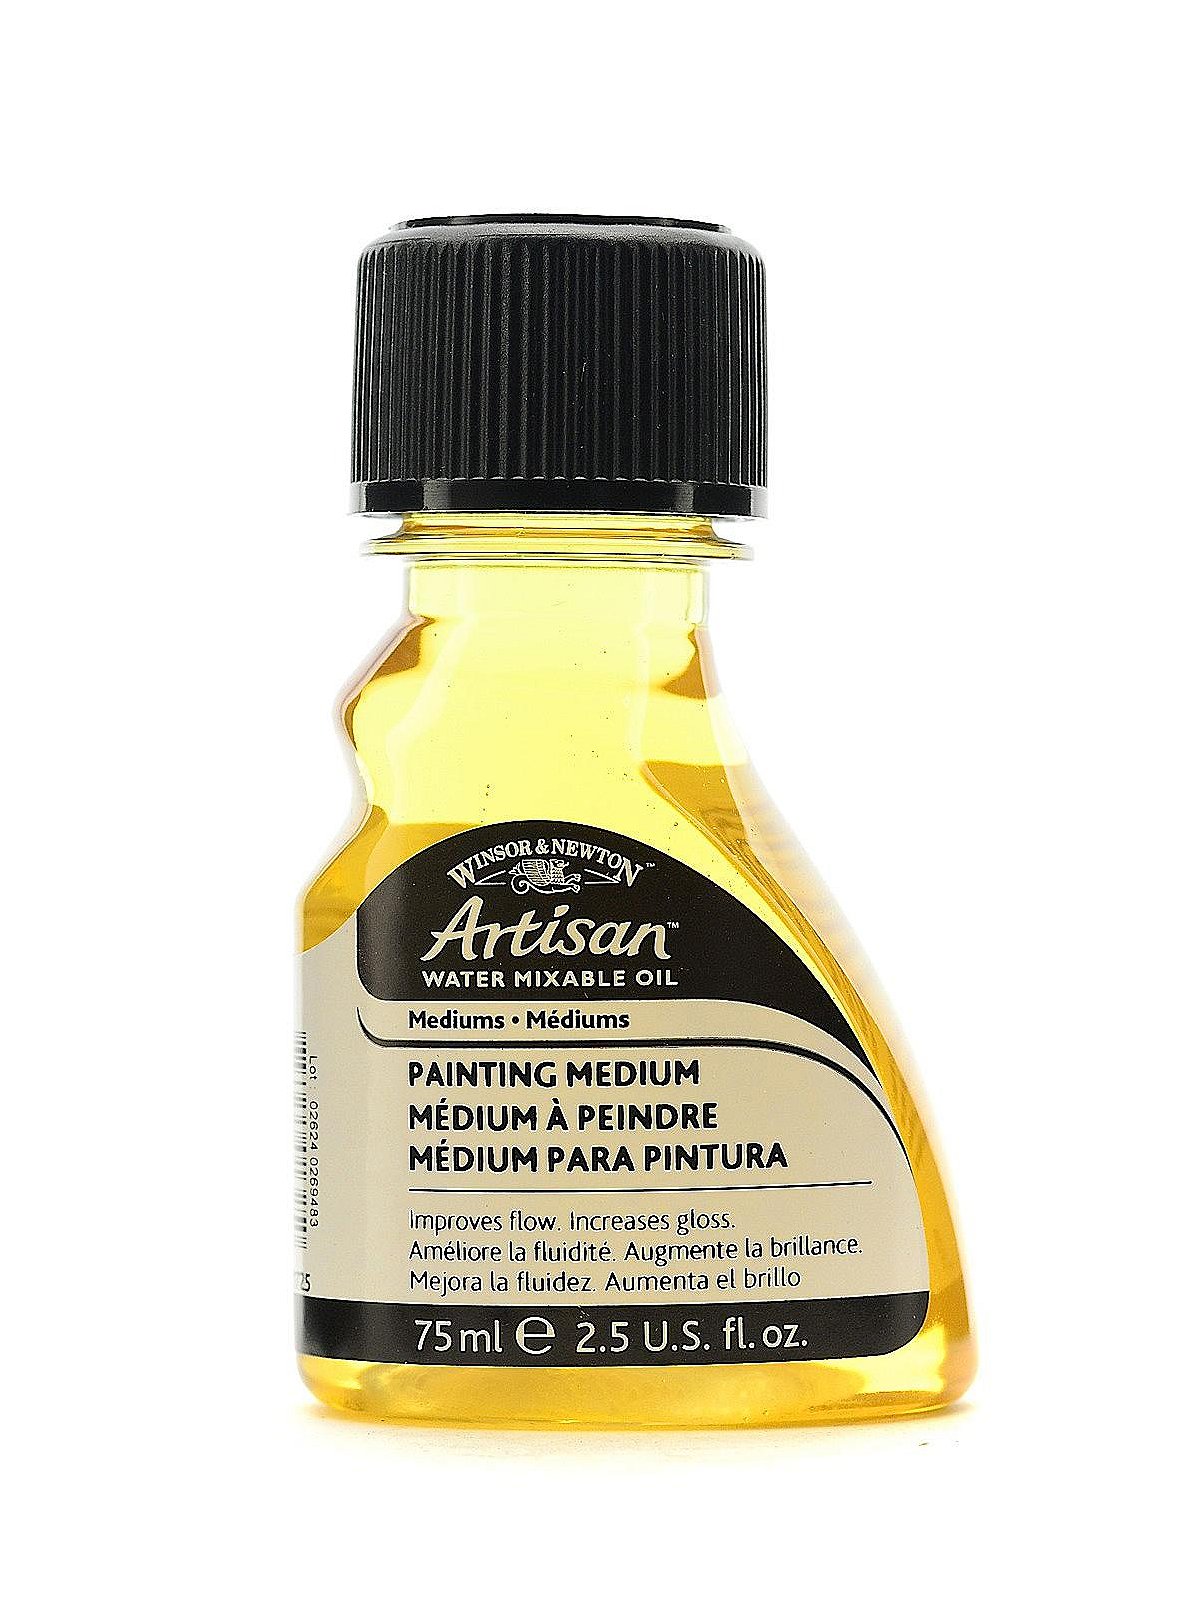 Winsor & Newton Artisan Water Mixable Oil Paint Thinner